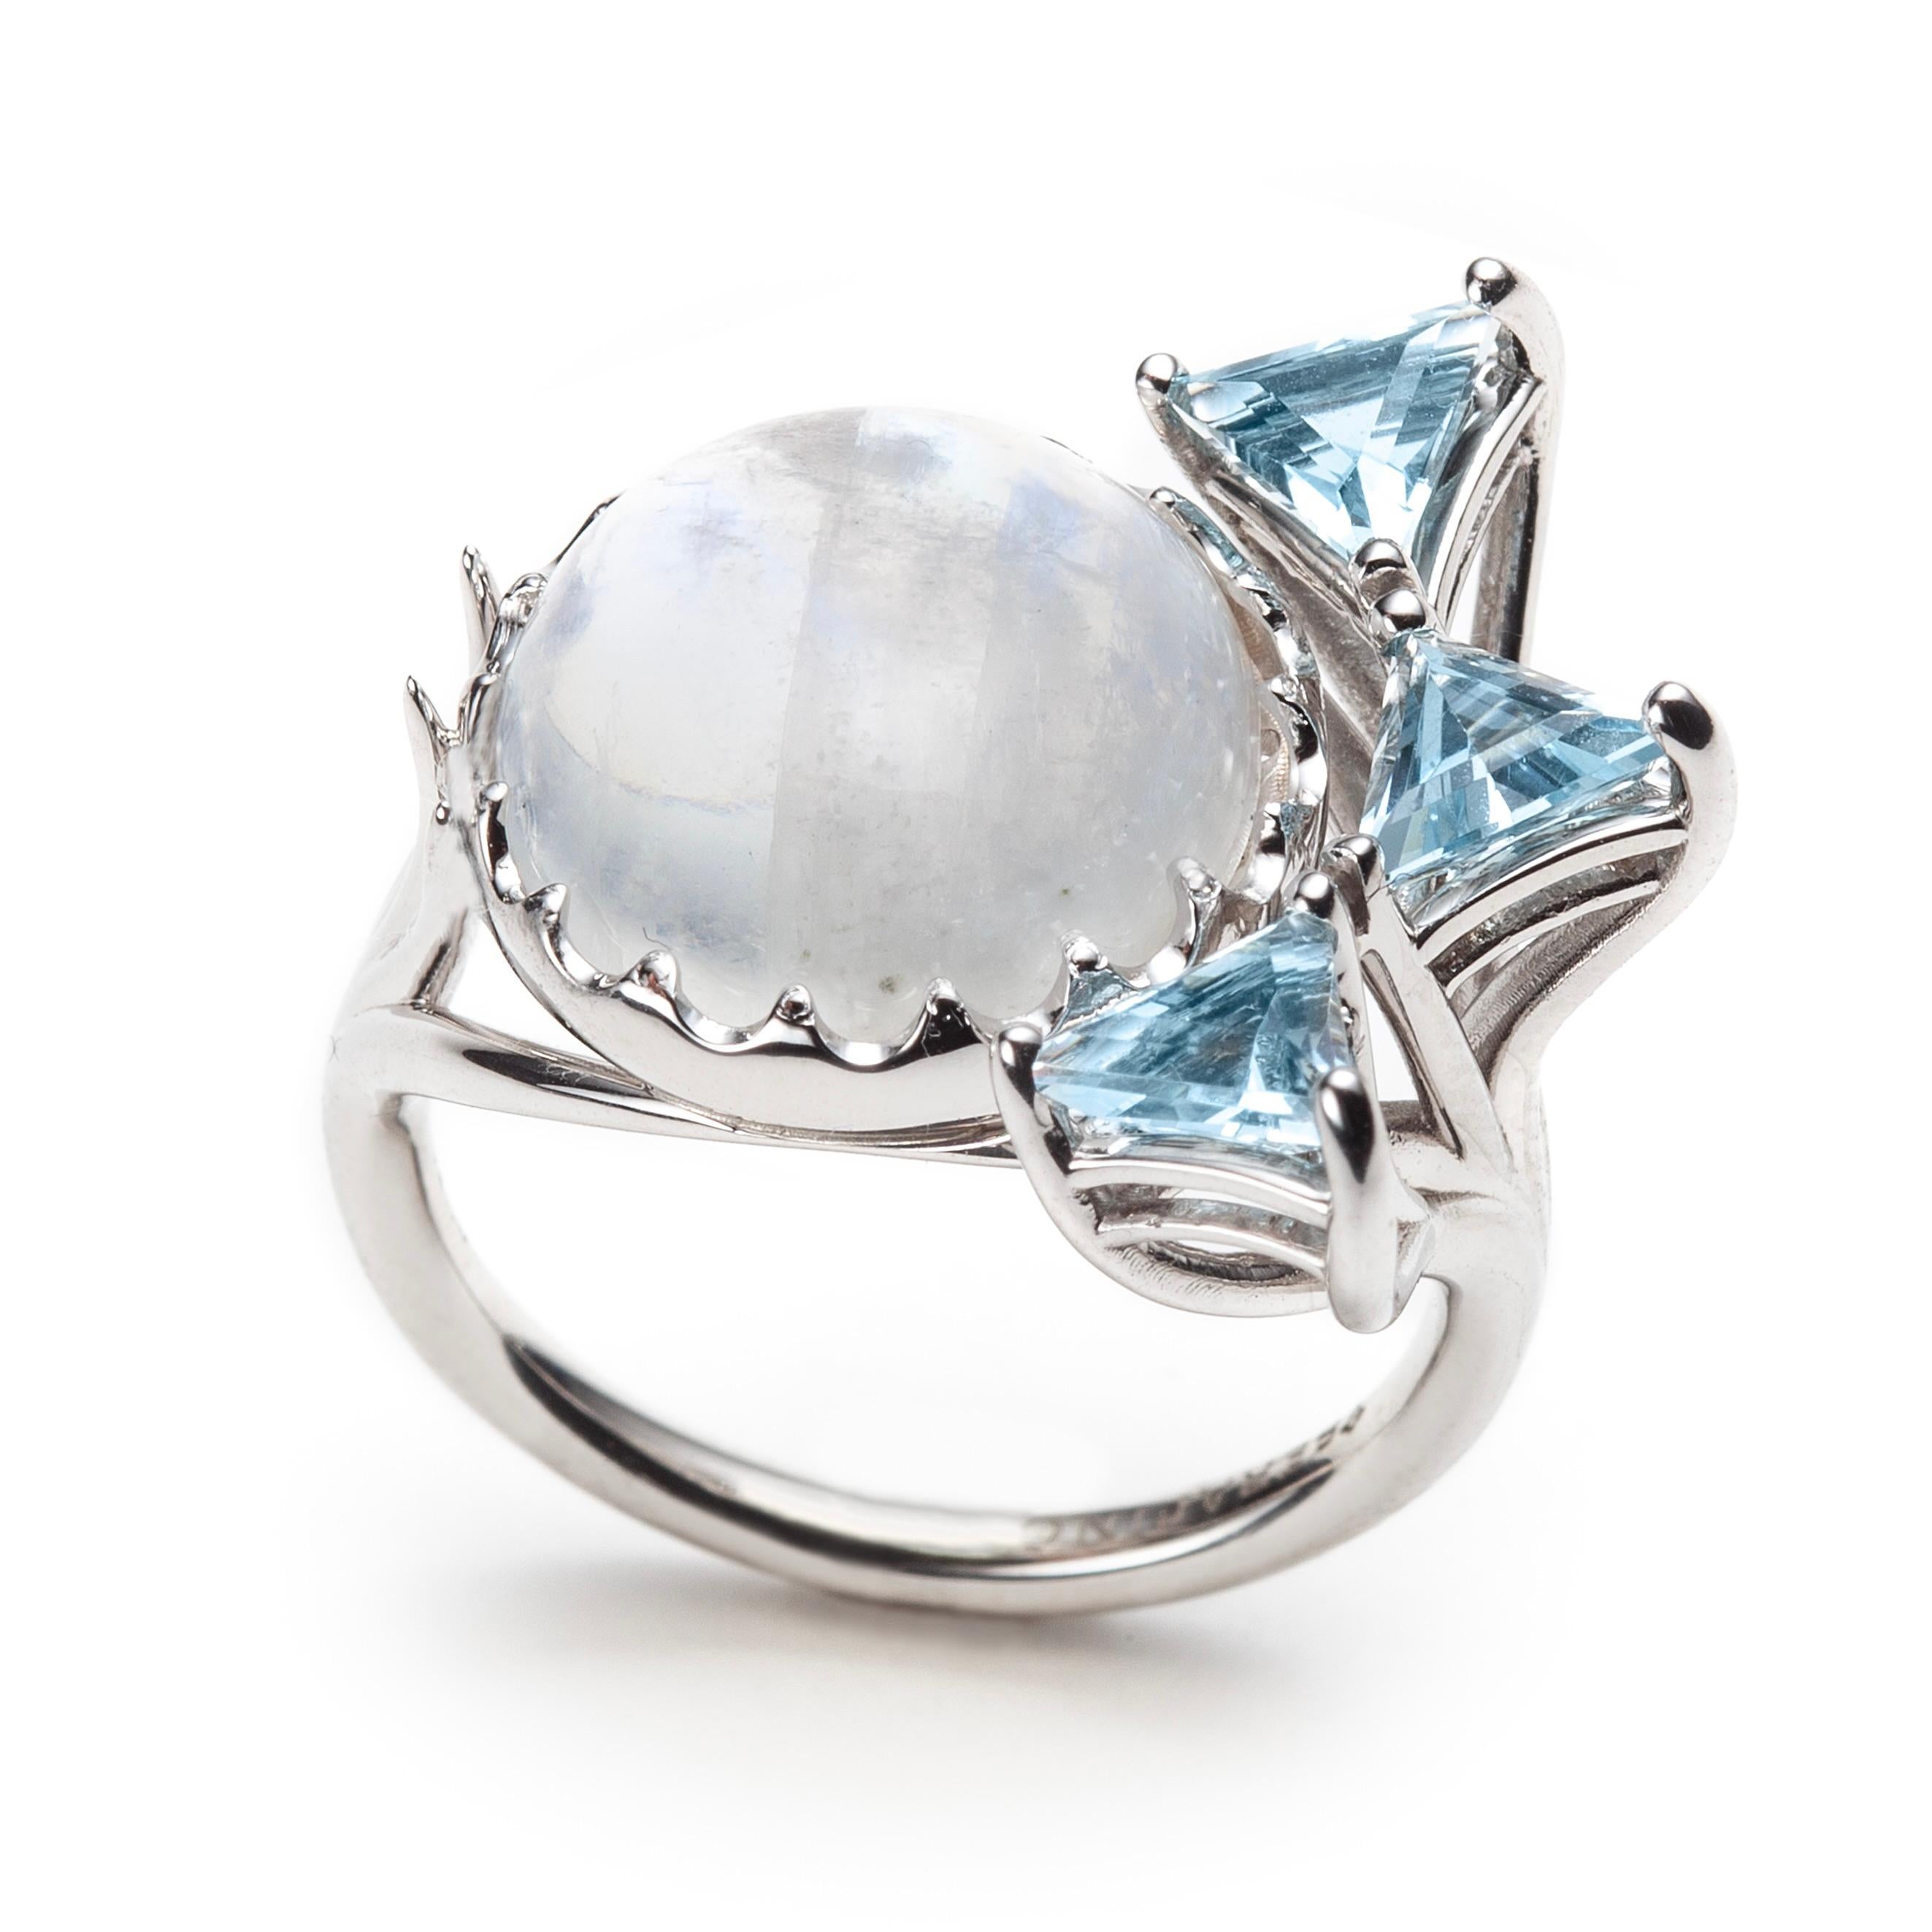 For Sale:  14k White Gold Ring set with a Moonstone Cabochon and Triangular Aquamarines 2